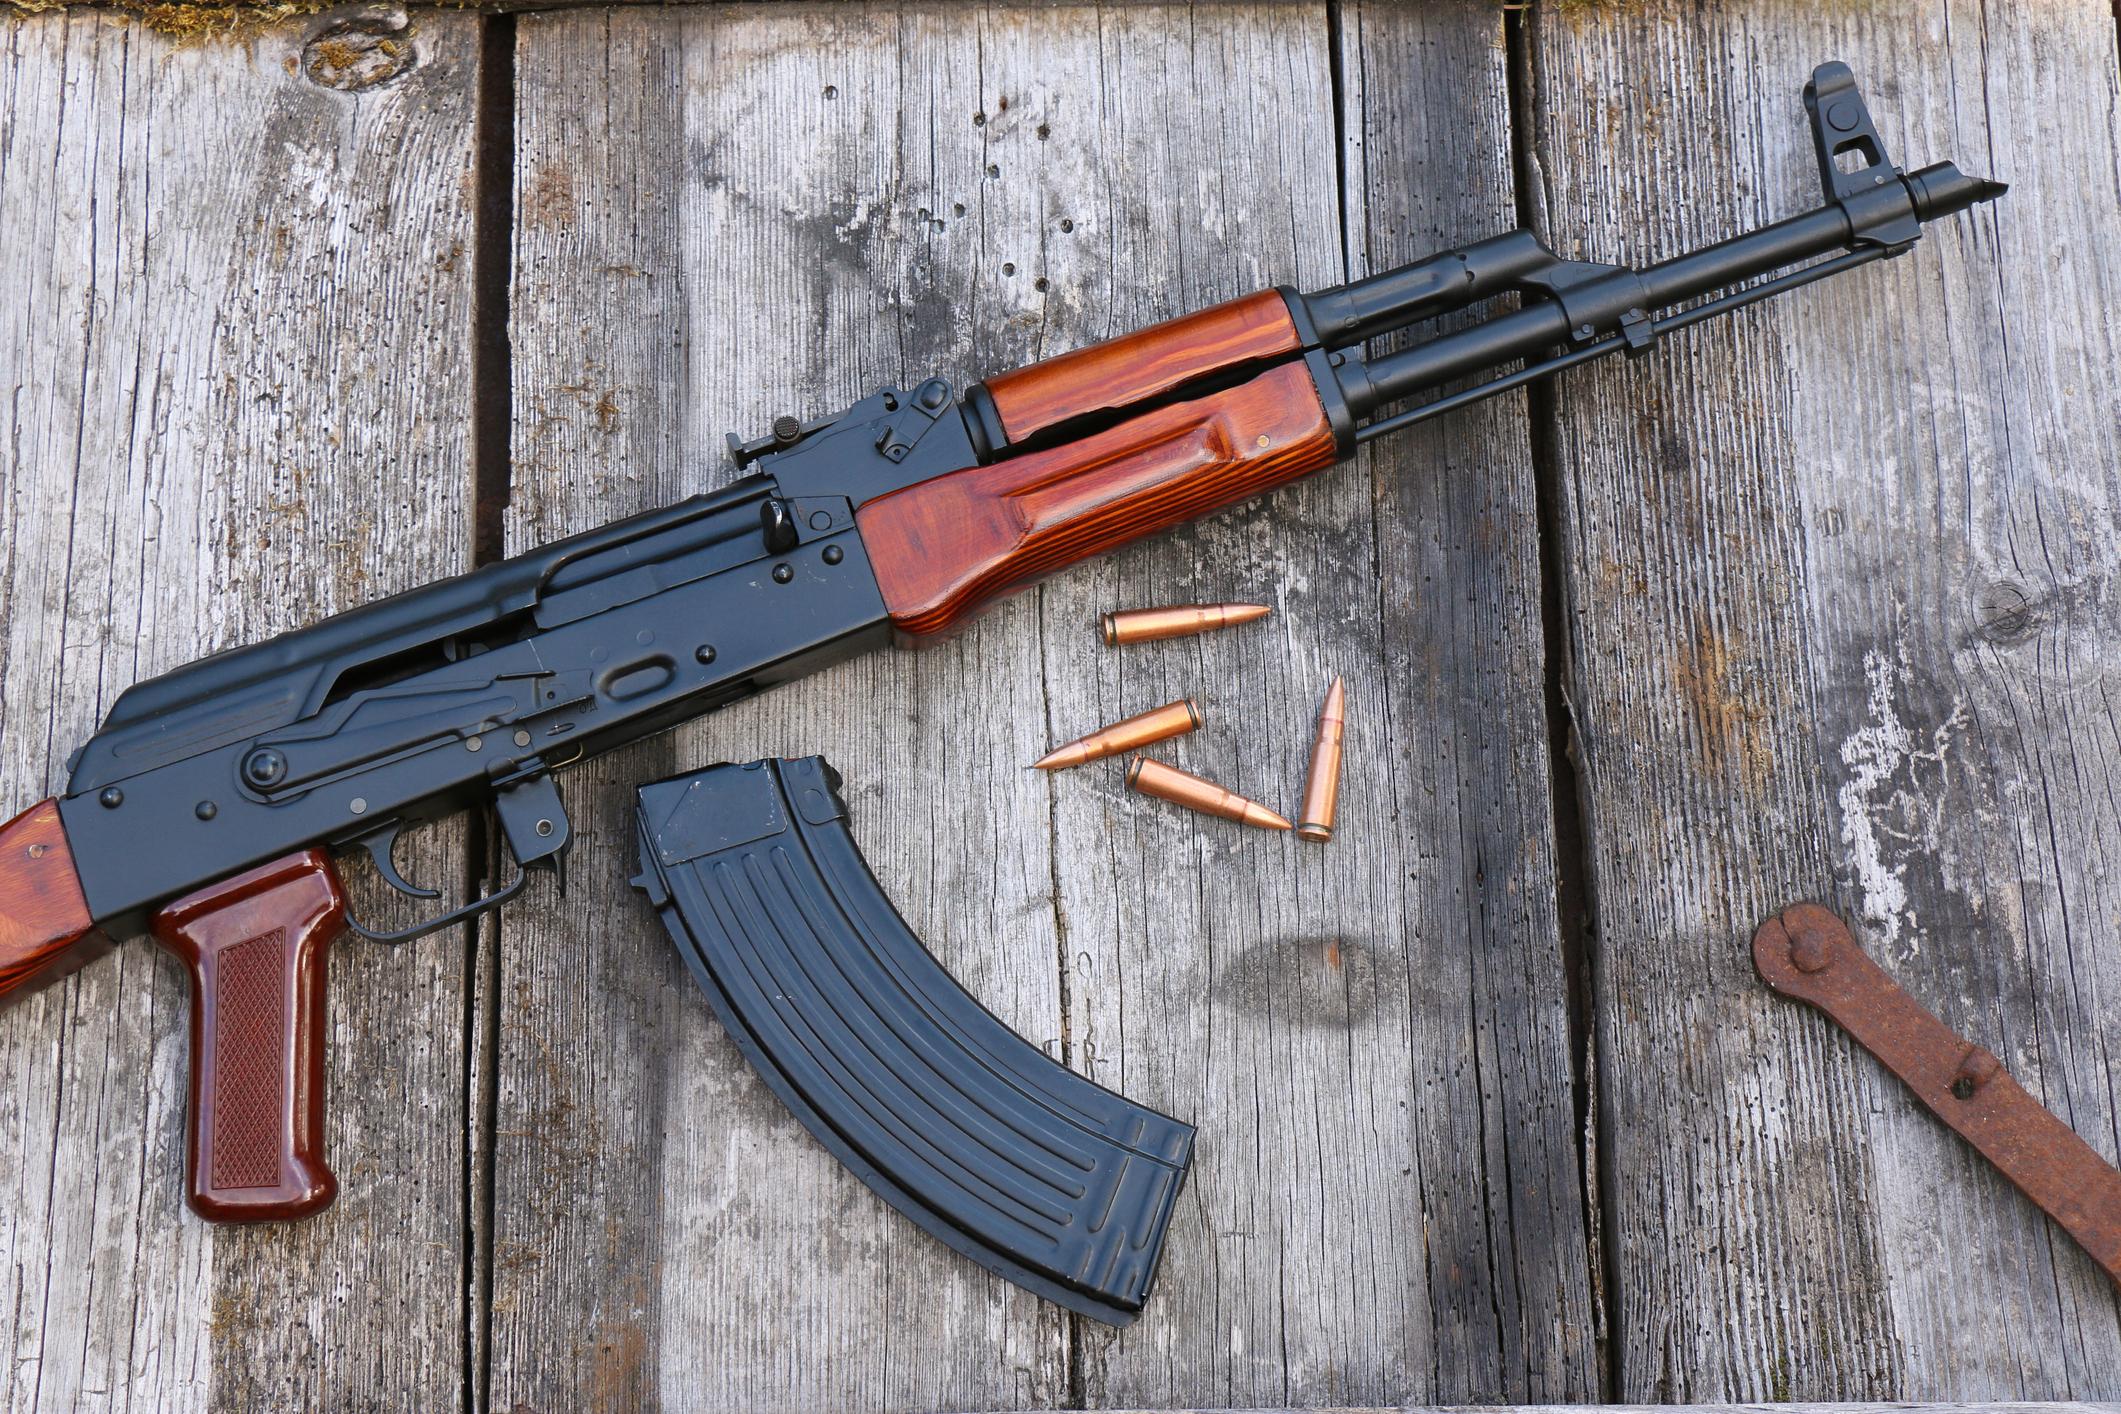 The famous Kalashnikov assault rifle with magazine and cartridges on an old, damaged board